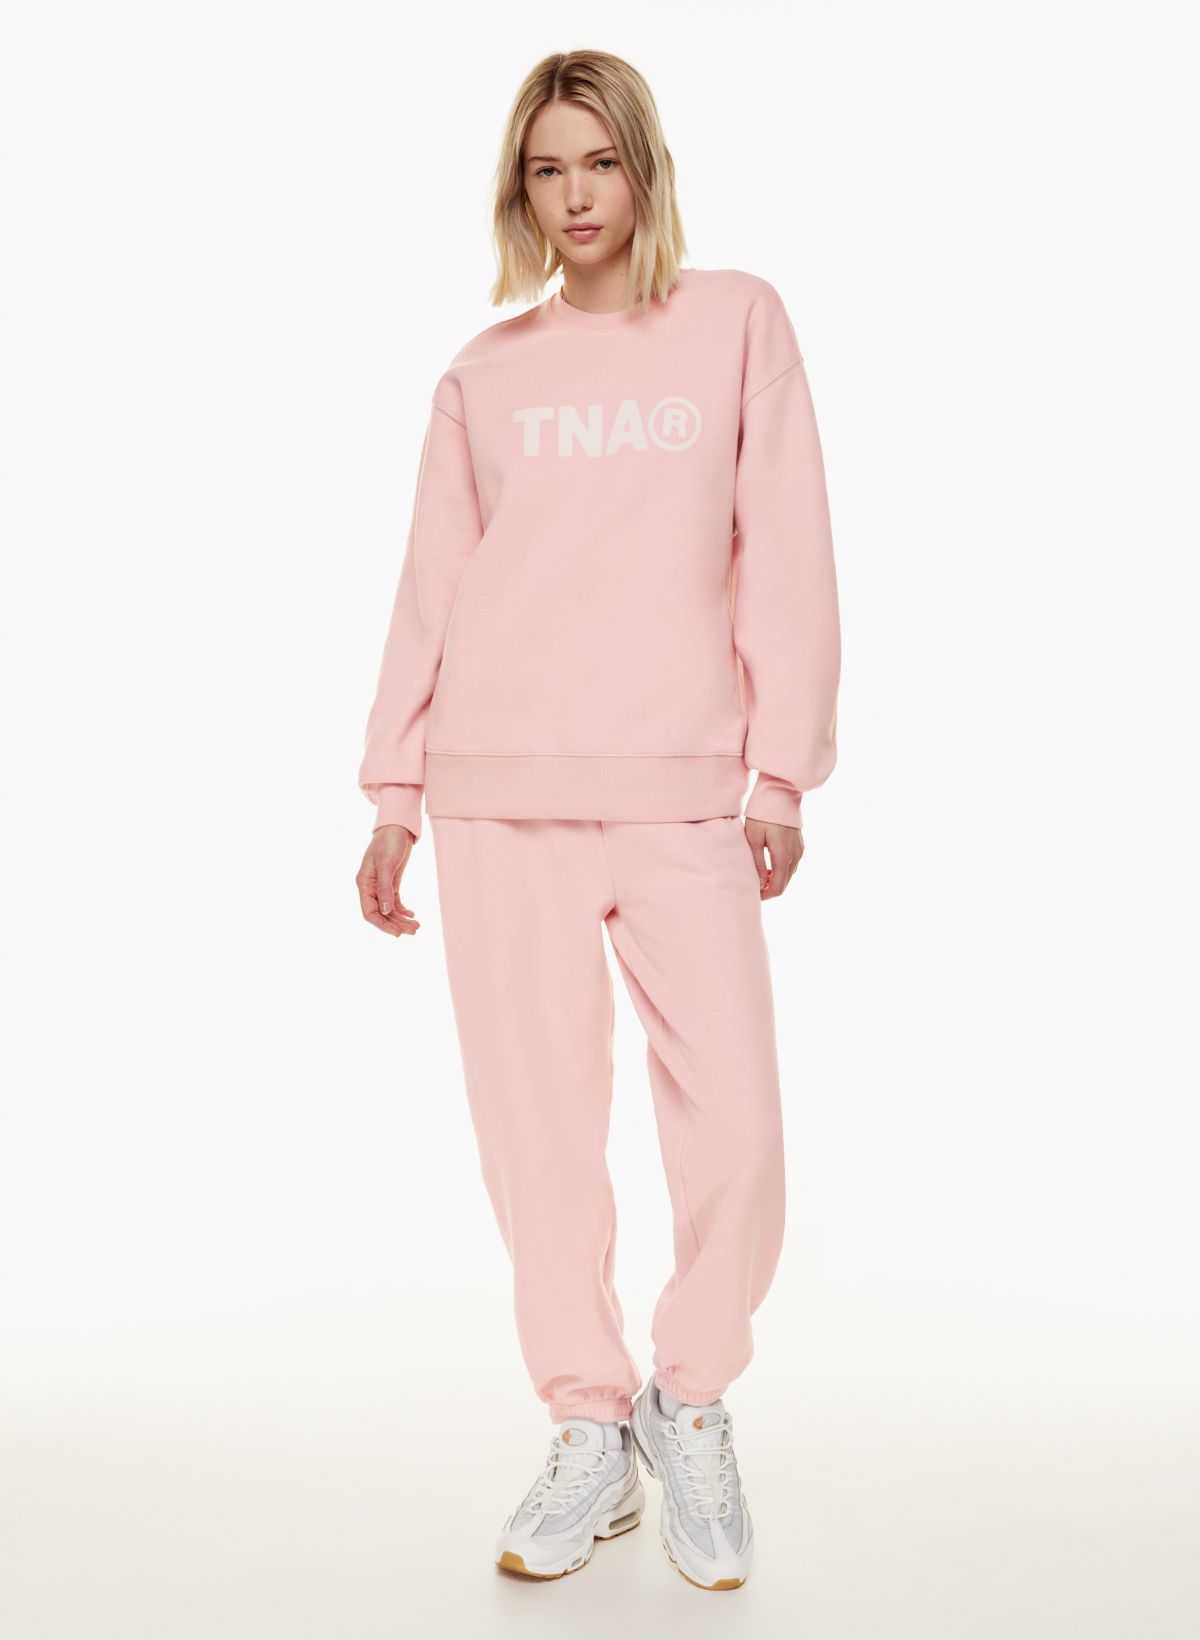 Finally got a matching sweatsuit set (TNA cozy fleece boyfriend) GD oracle  pink in both regular and small. I'm 53, 112 pounds, and it's cute, fits  well and is roomy! The color